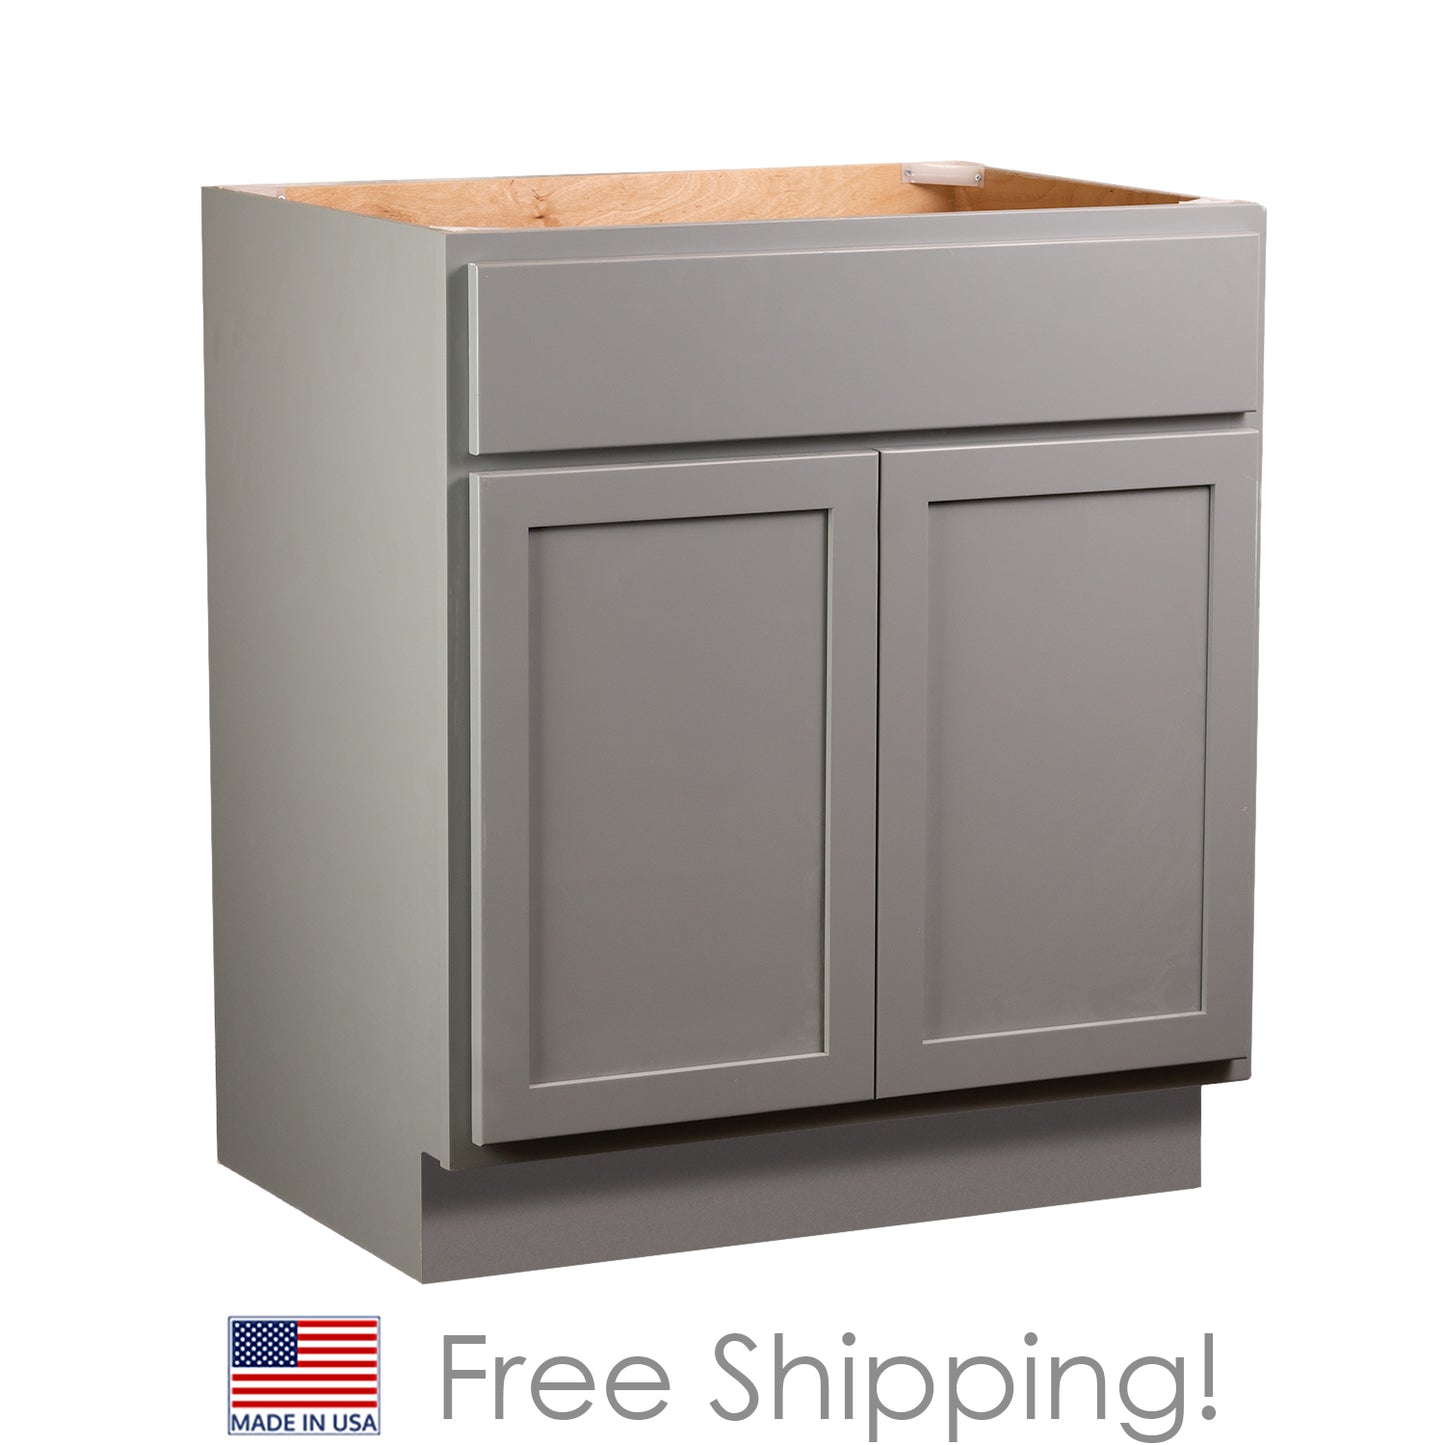 Quicklock RTA (Ready-to-Assemble) Magnetic Grey Vanity Base Cabinet- 30"W x (18", 21"D)